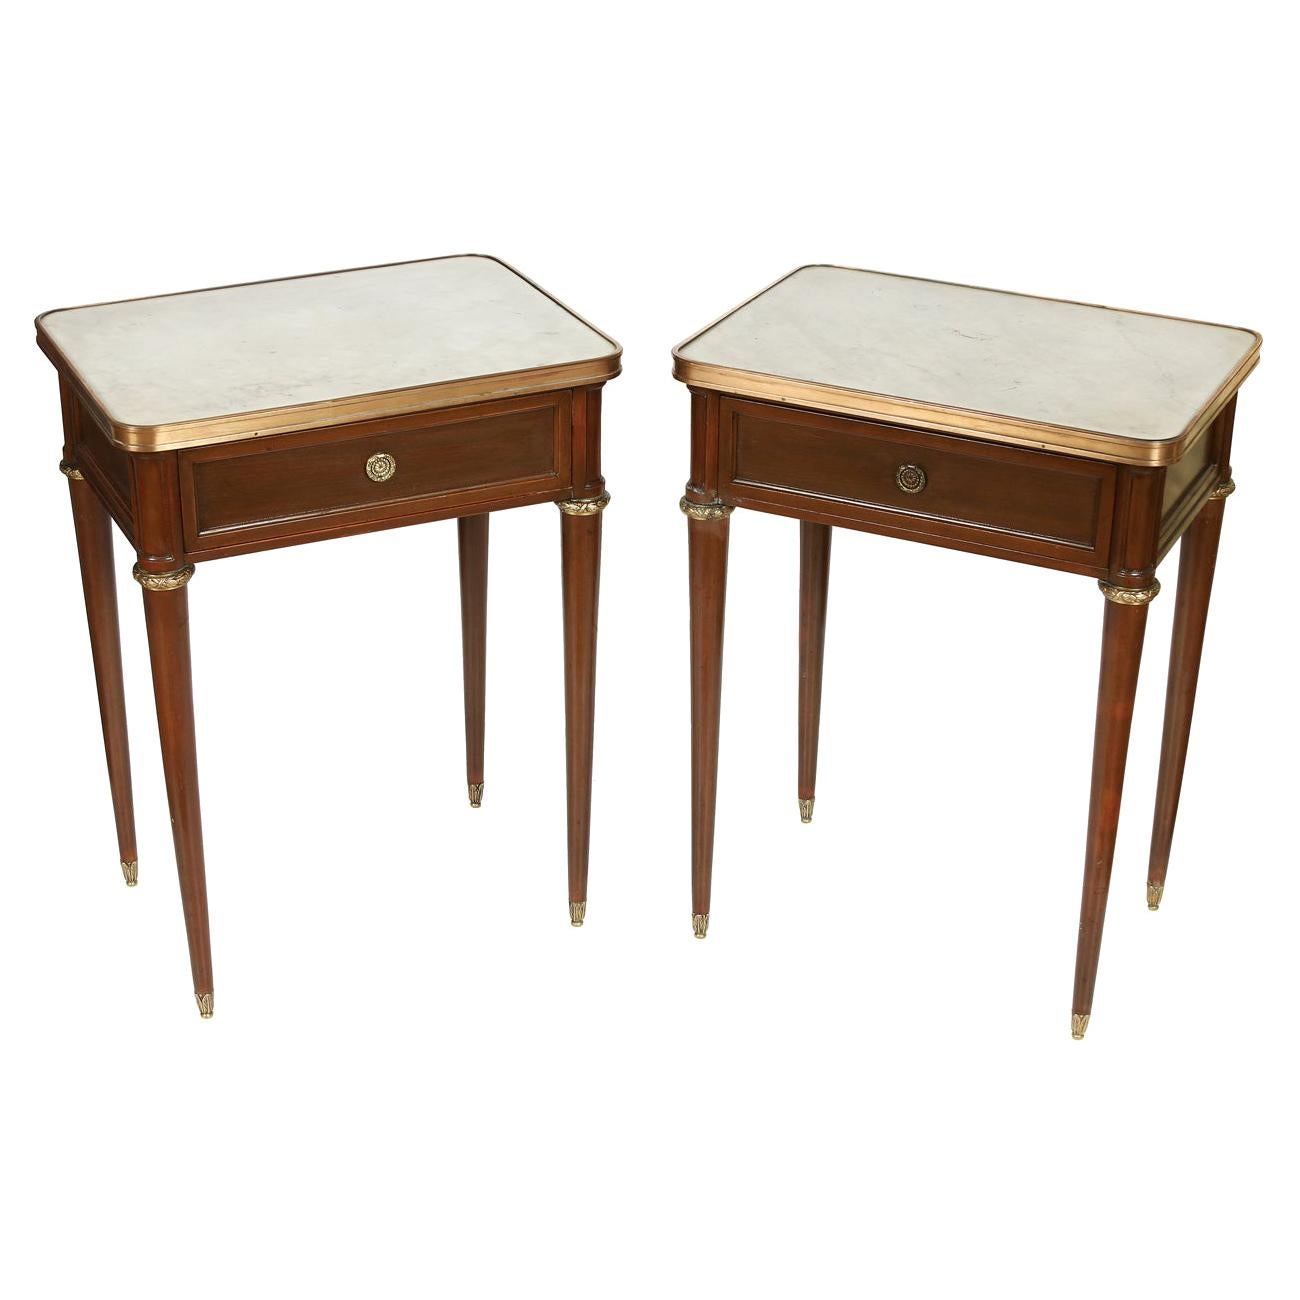 Pair of Mahogany Marble Top Nightstands with Brass Fittings